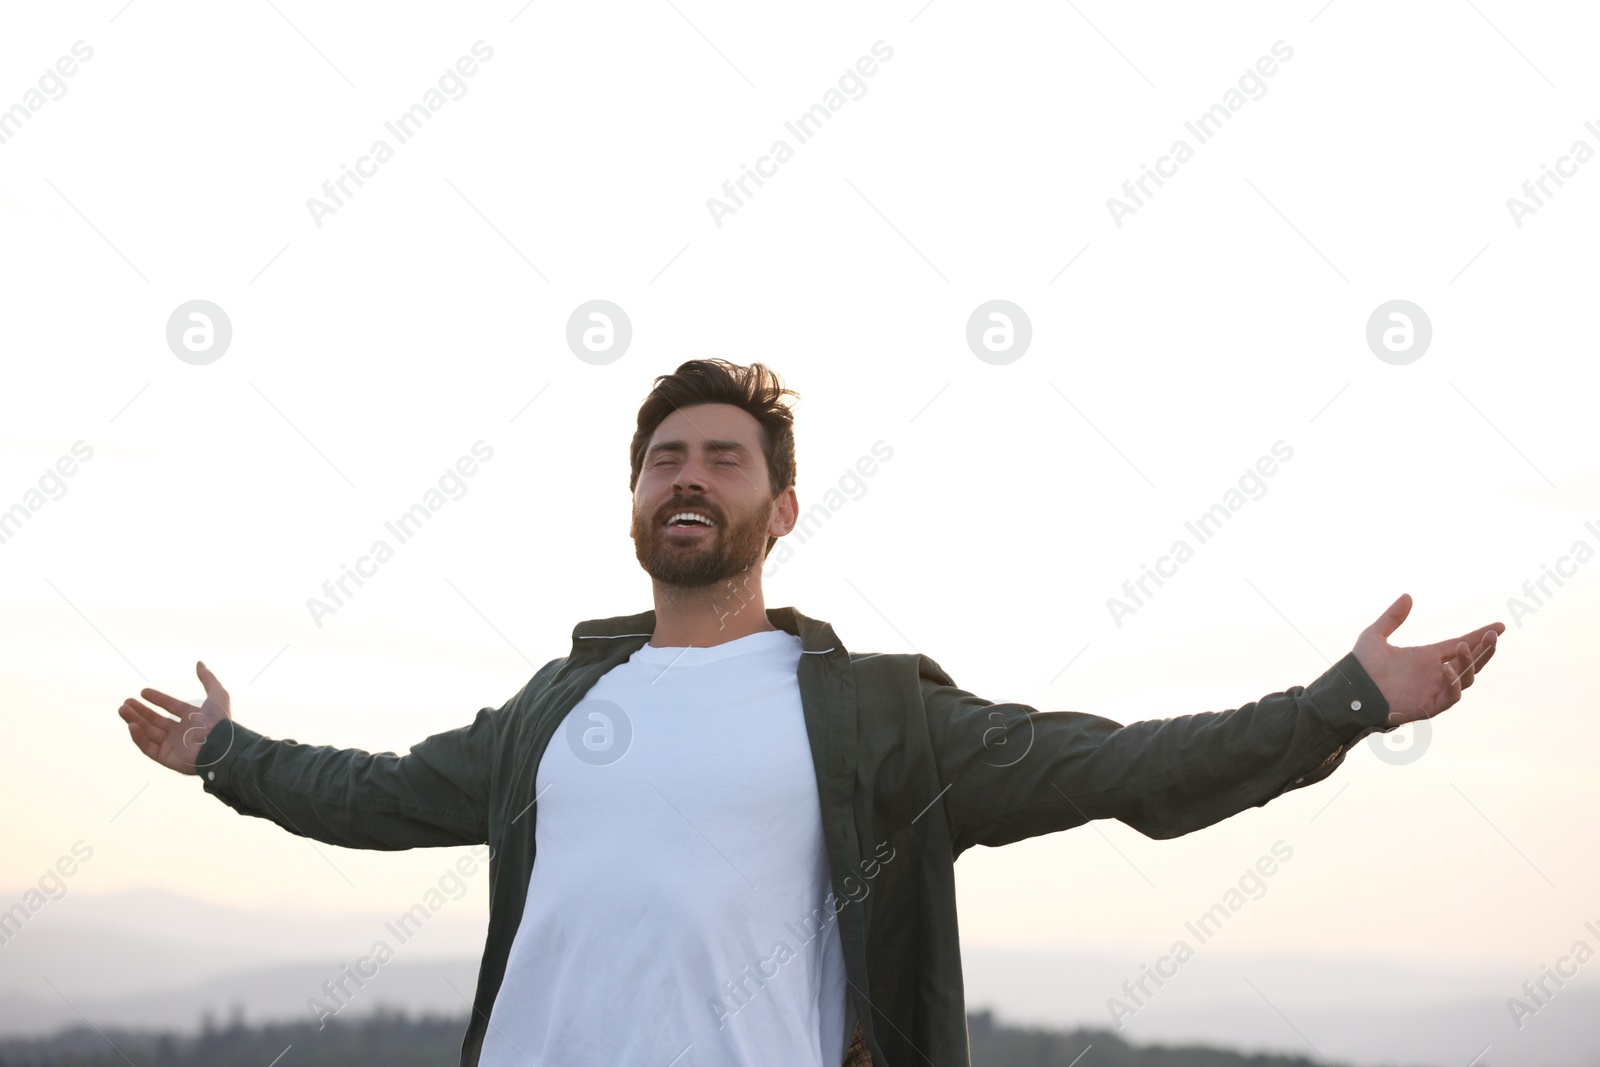 Photo of Feeling freedom. Happy man with wide open arms against sky outdoors